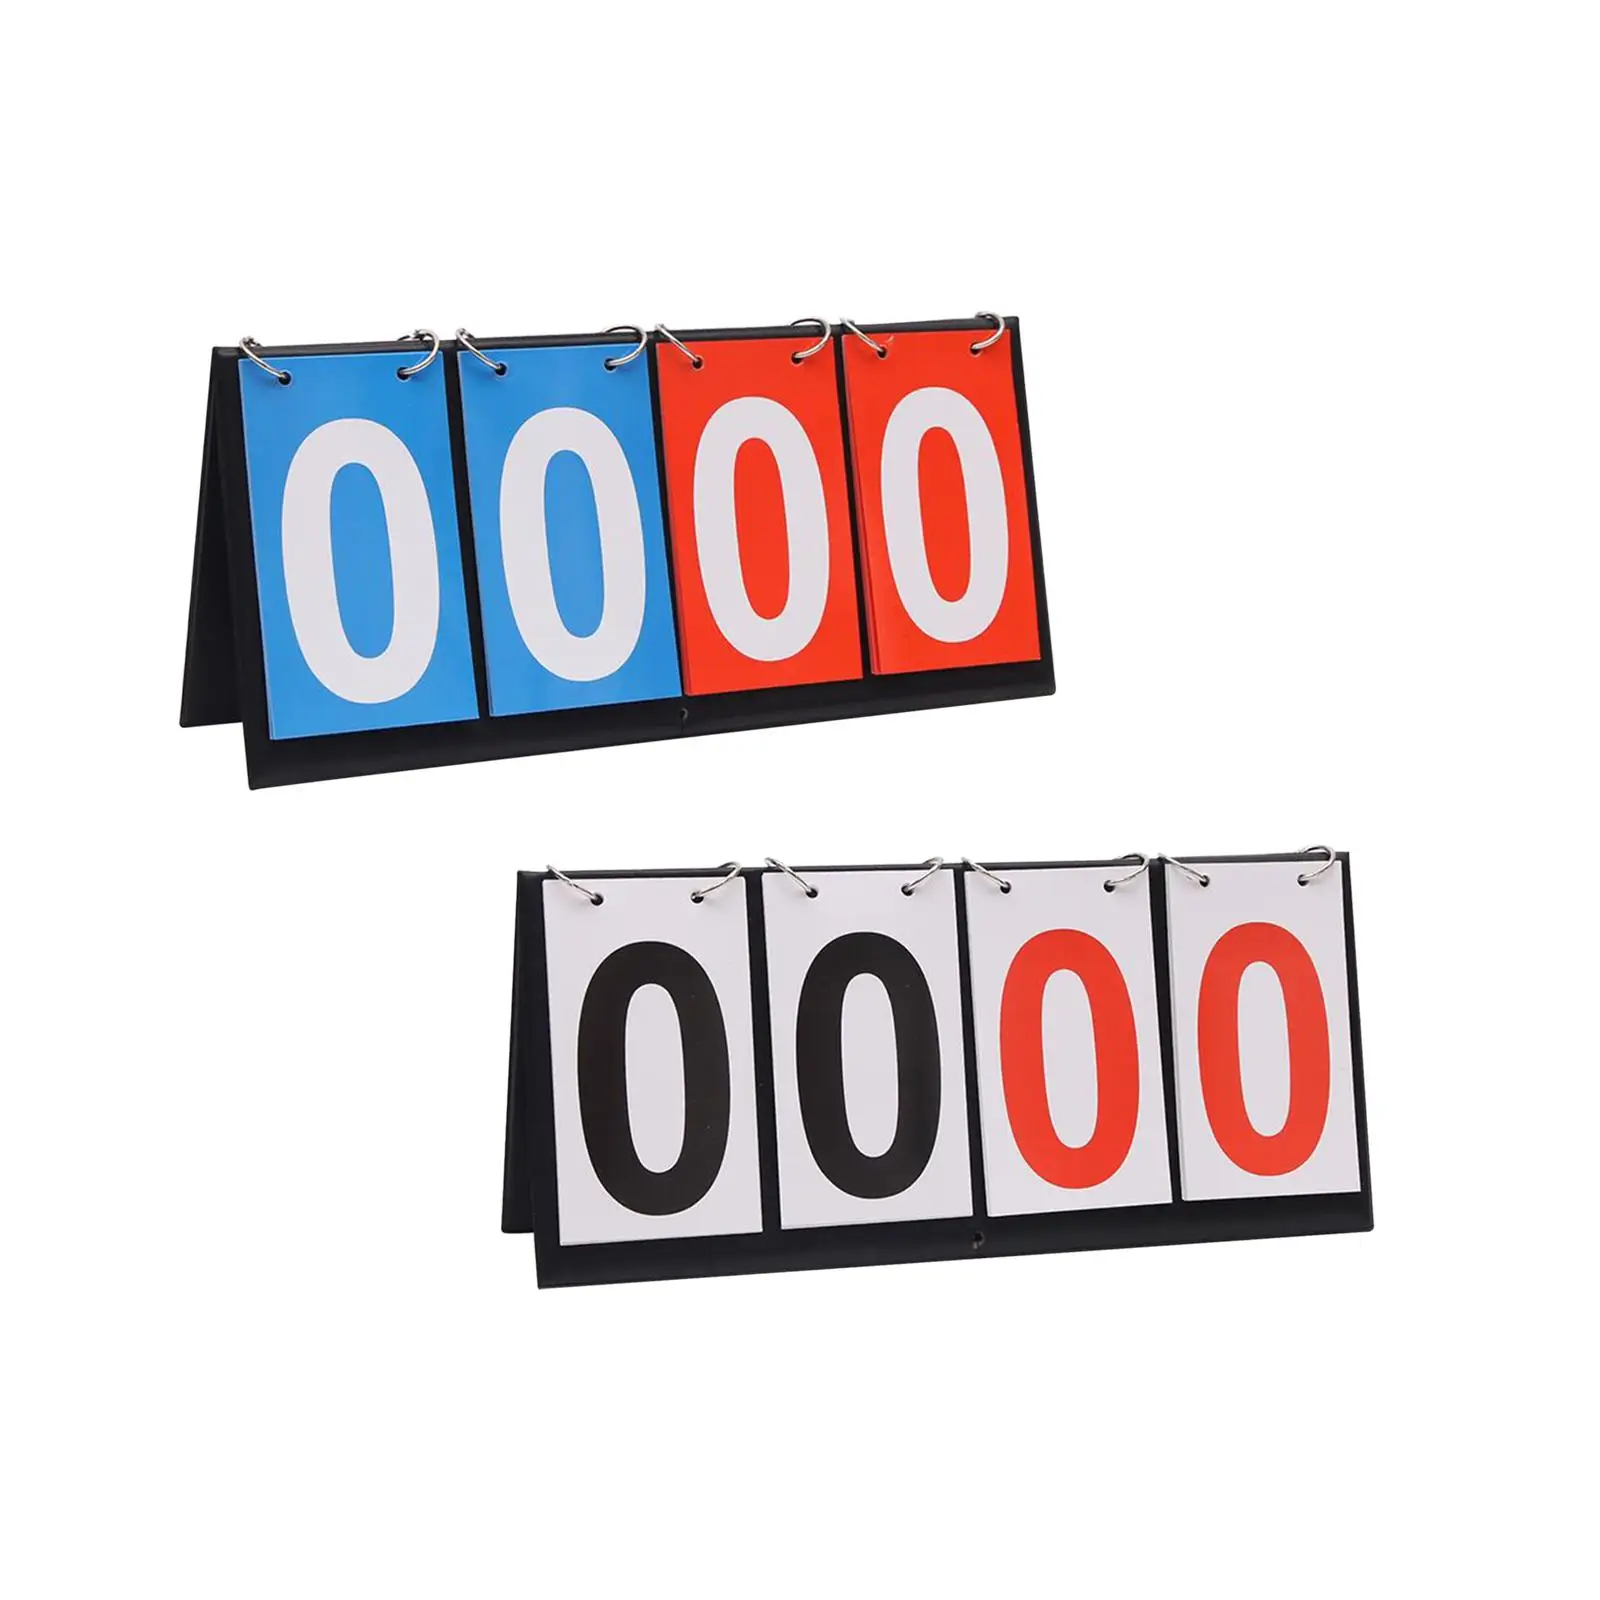 Tabletop Scoreboard 0-99 Soccer Referee Score Board Scorekeeper for Basketball Indoor Sports Team Games Pingpong Ball Volleyball